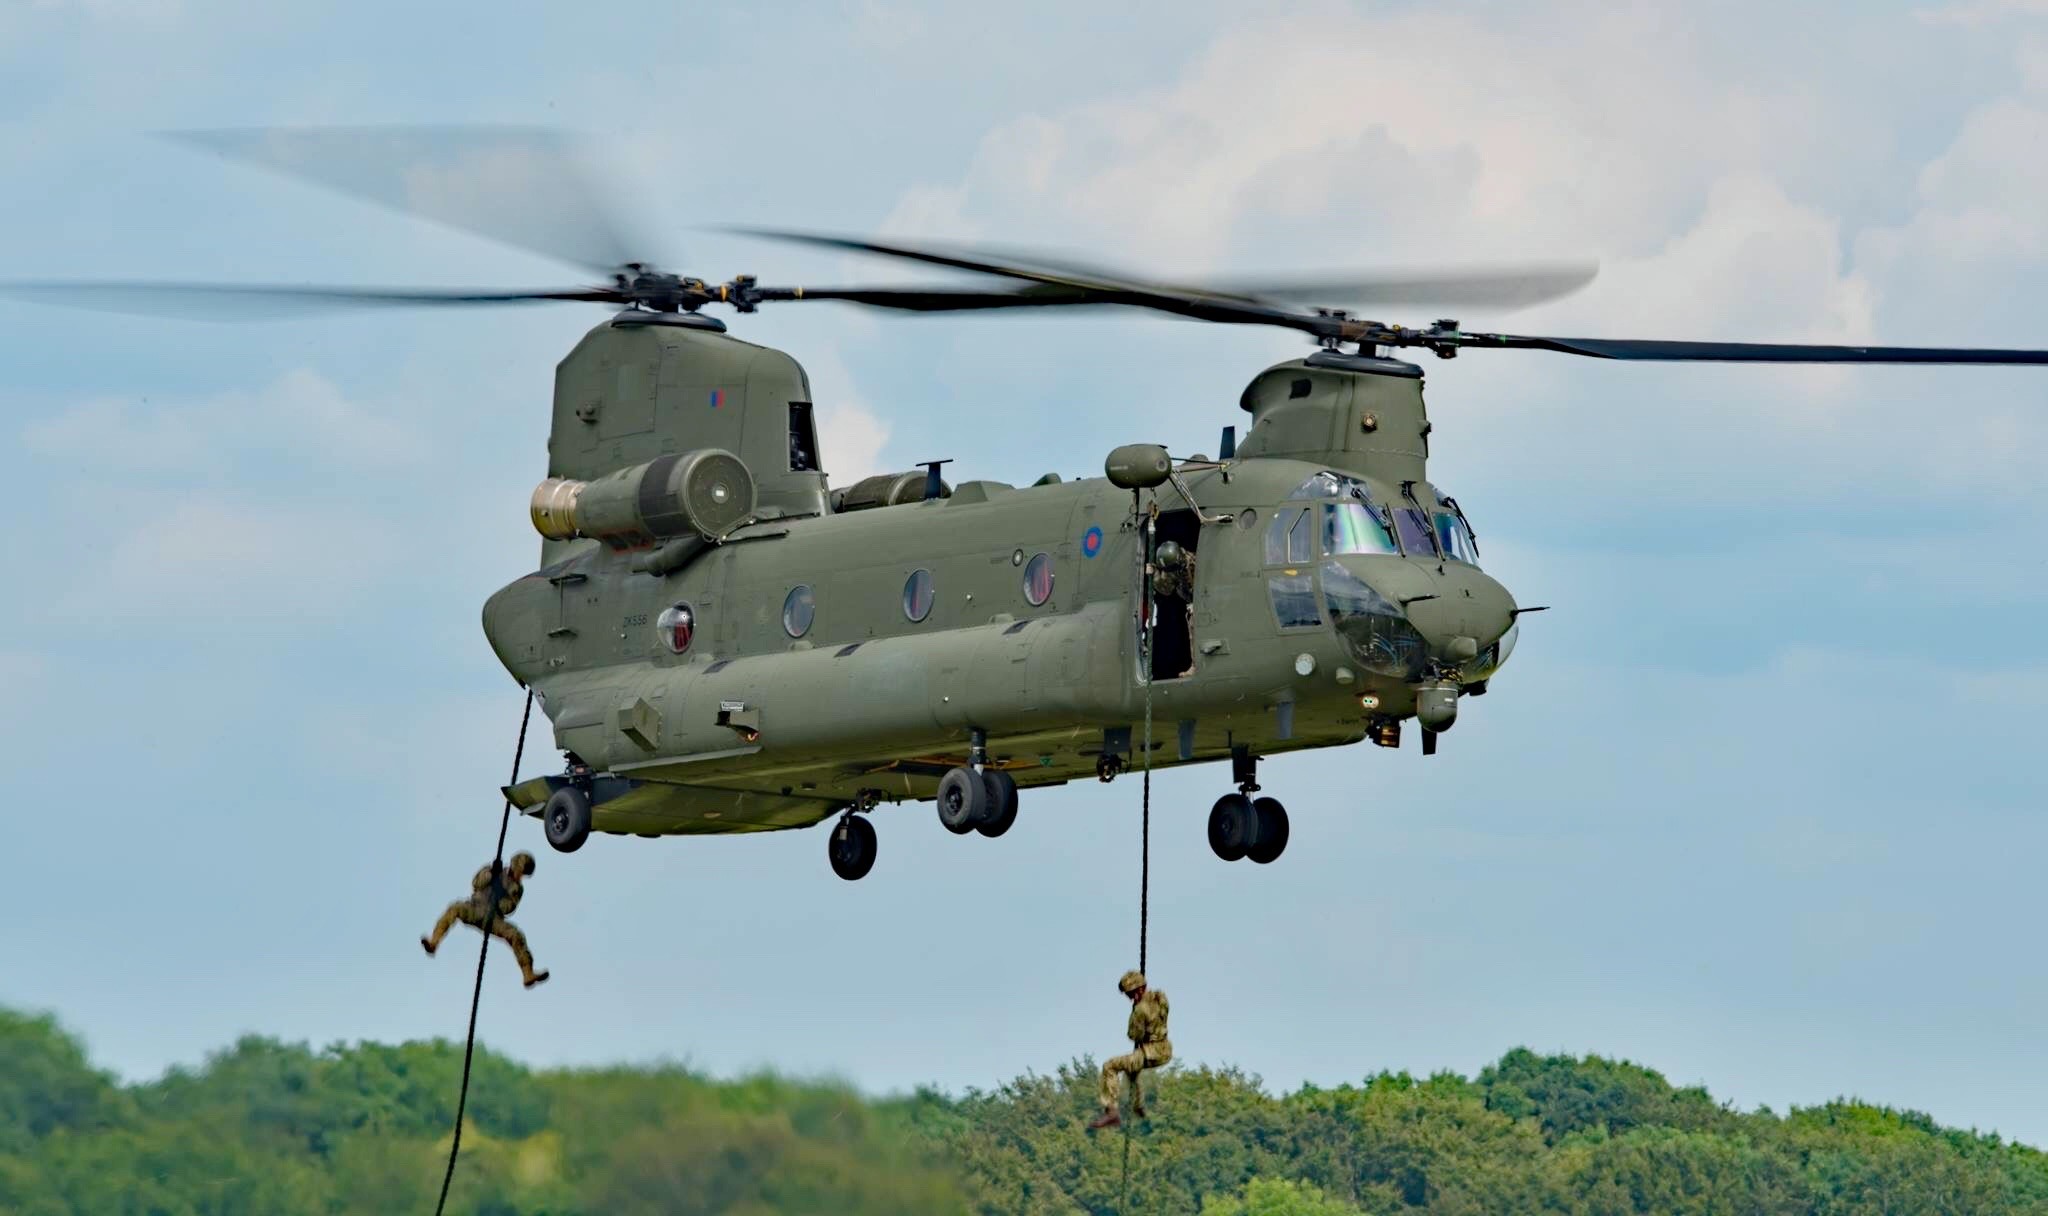 A Chinook helicopter is pictured during fast rope training with live troops 